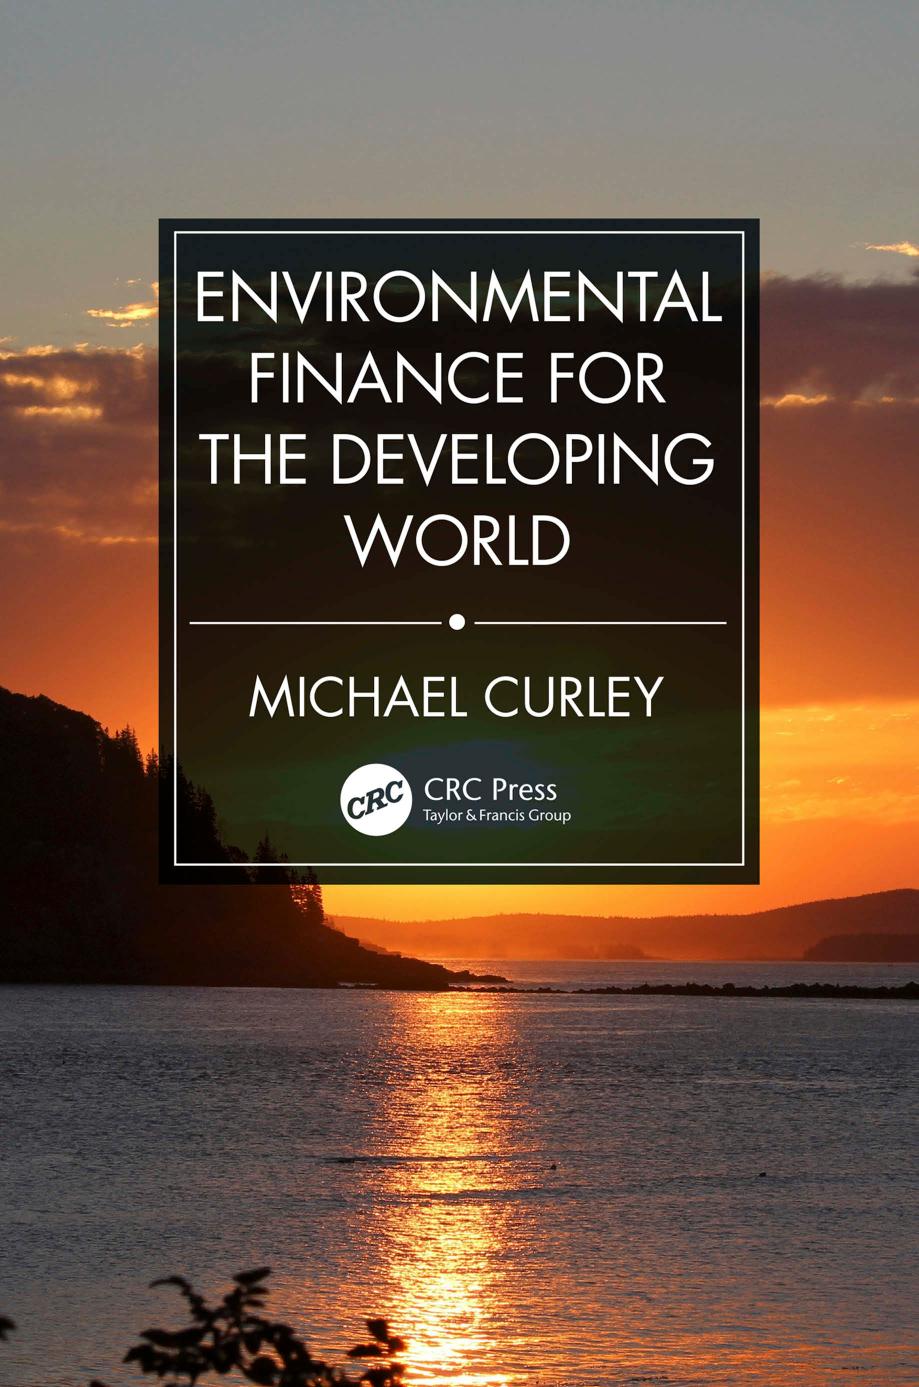 Financing the Global Environment